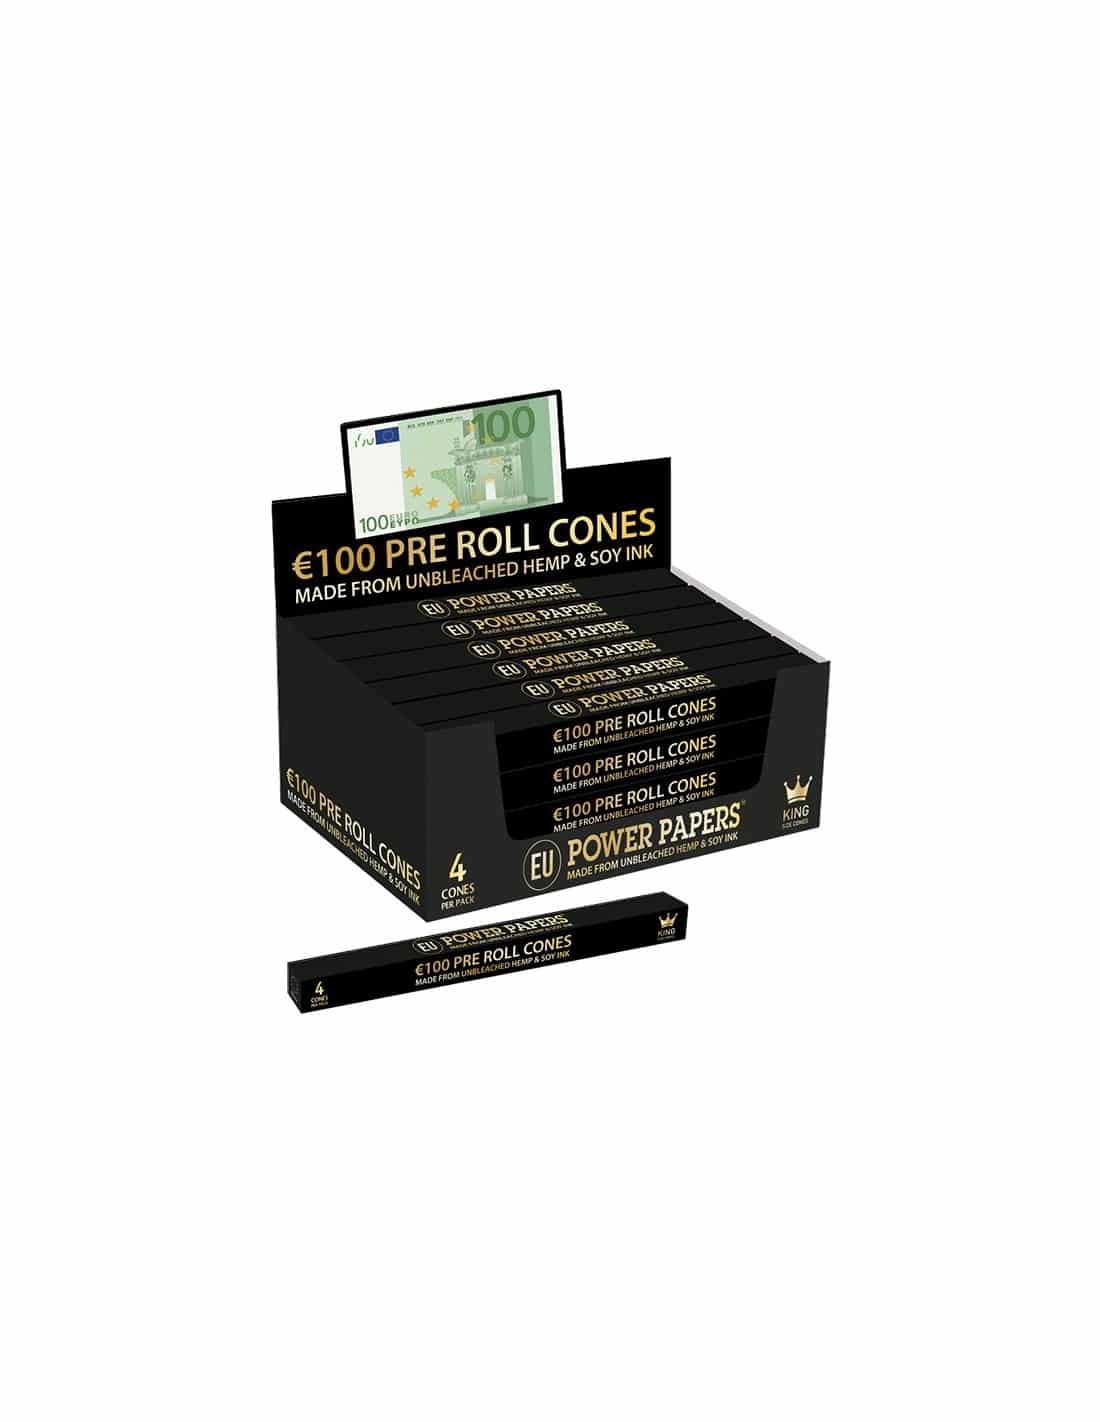 euro-pre-rolled-cones-display-of-24-boxes-1